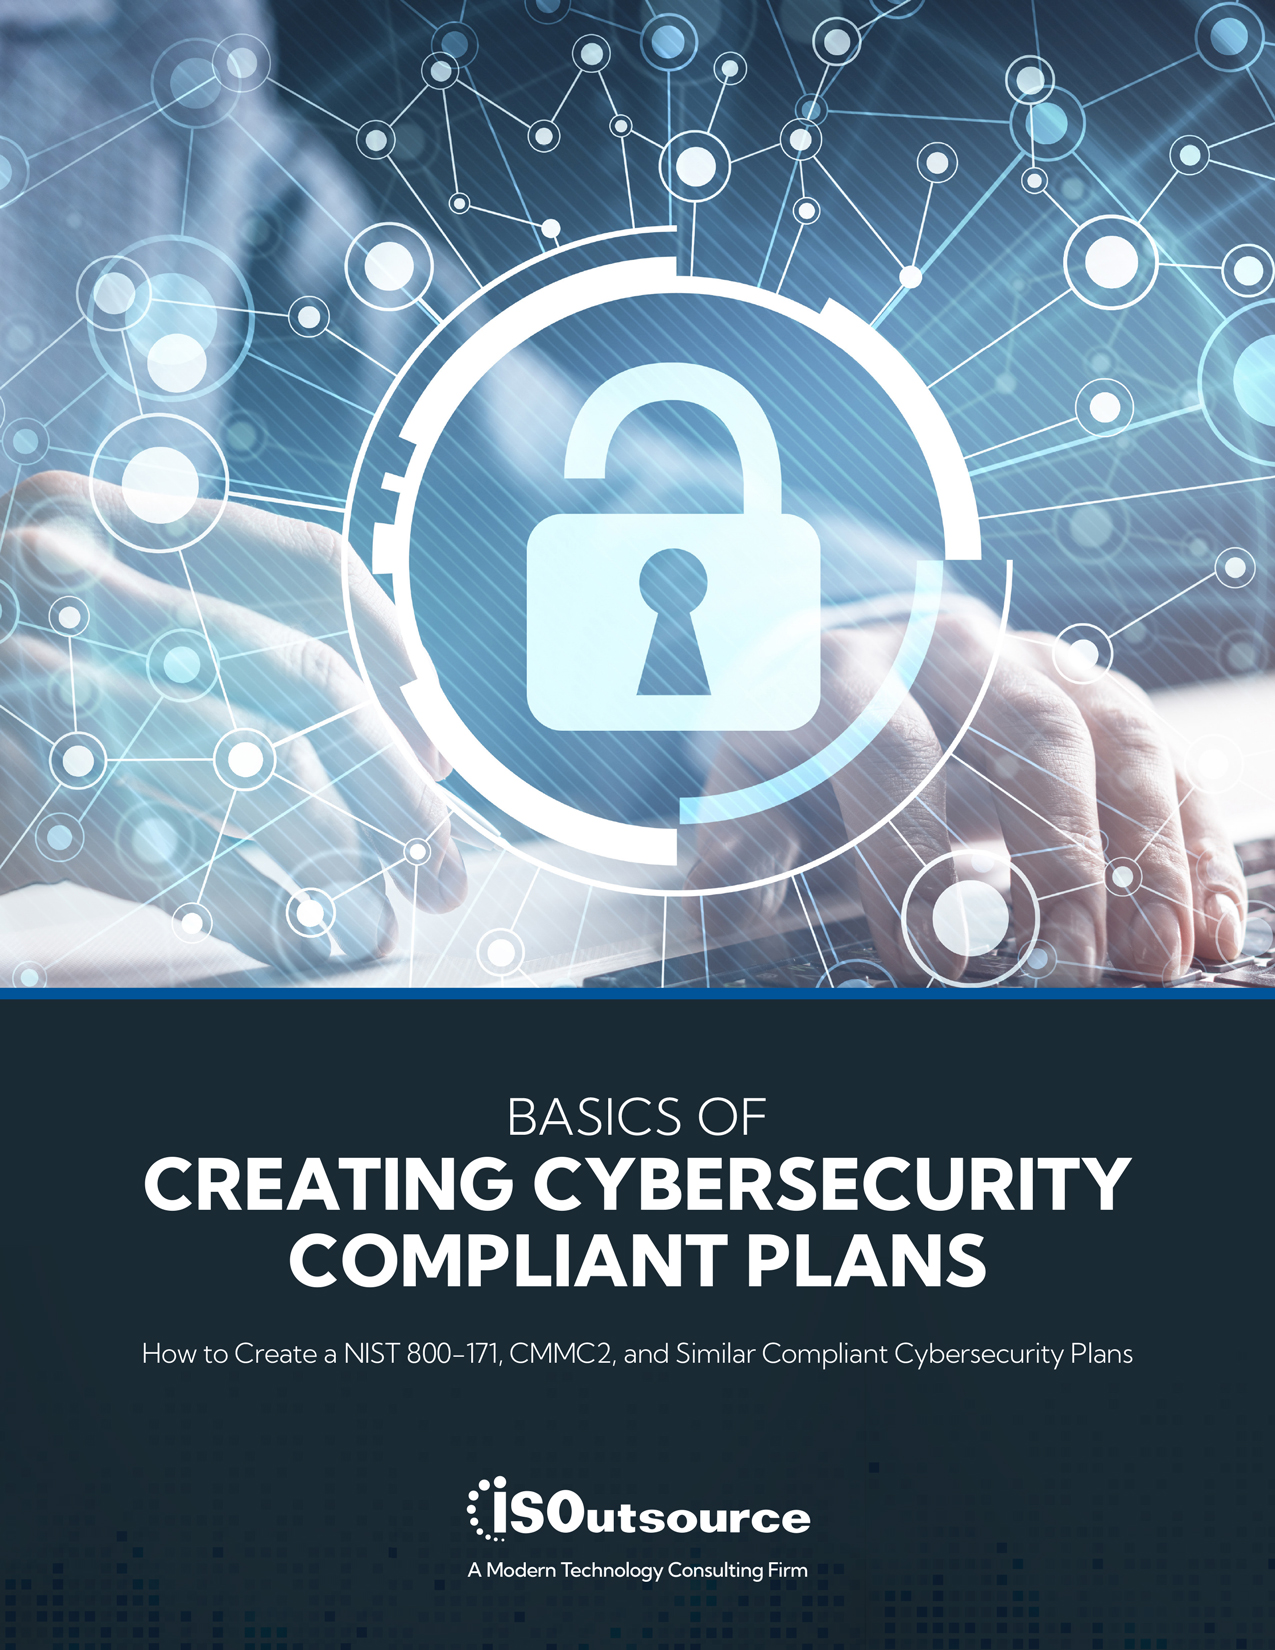 Basics-of-Creating-Cybersecurity-Compliant-Plans